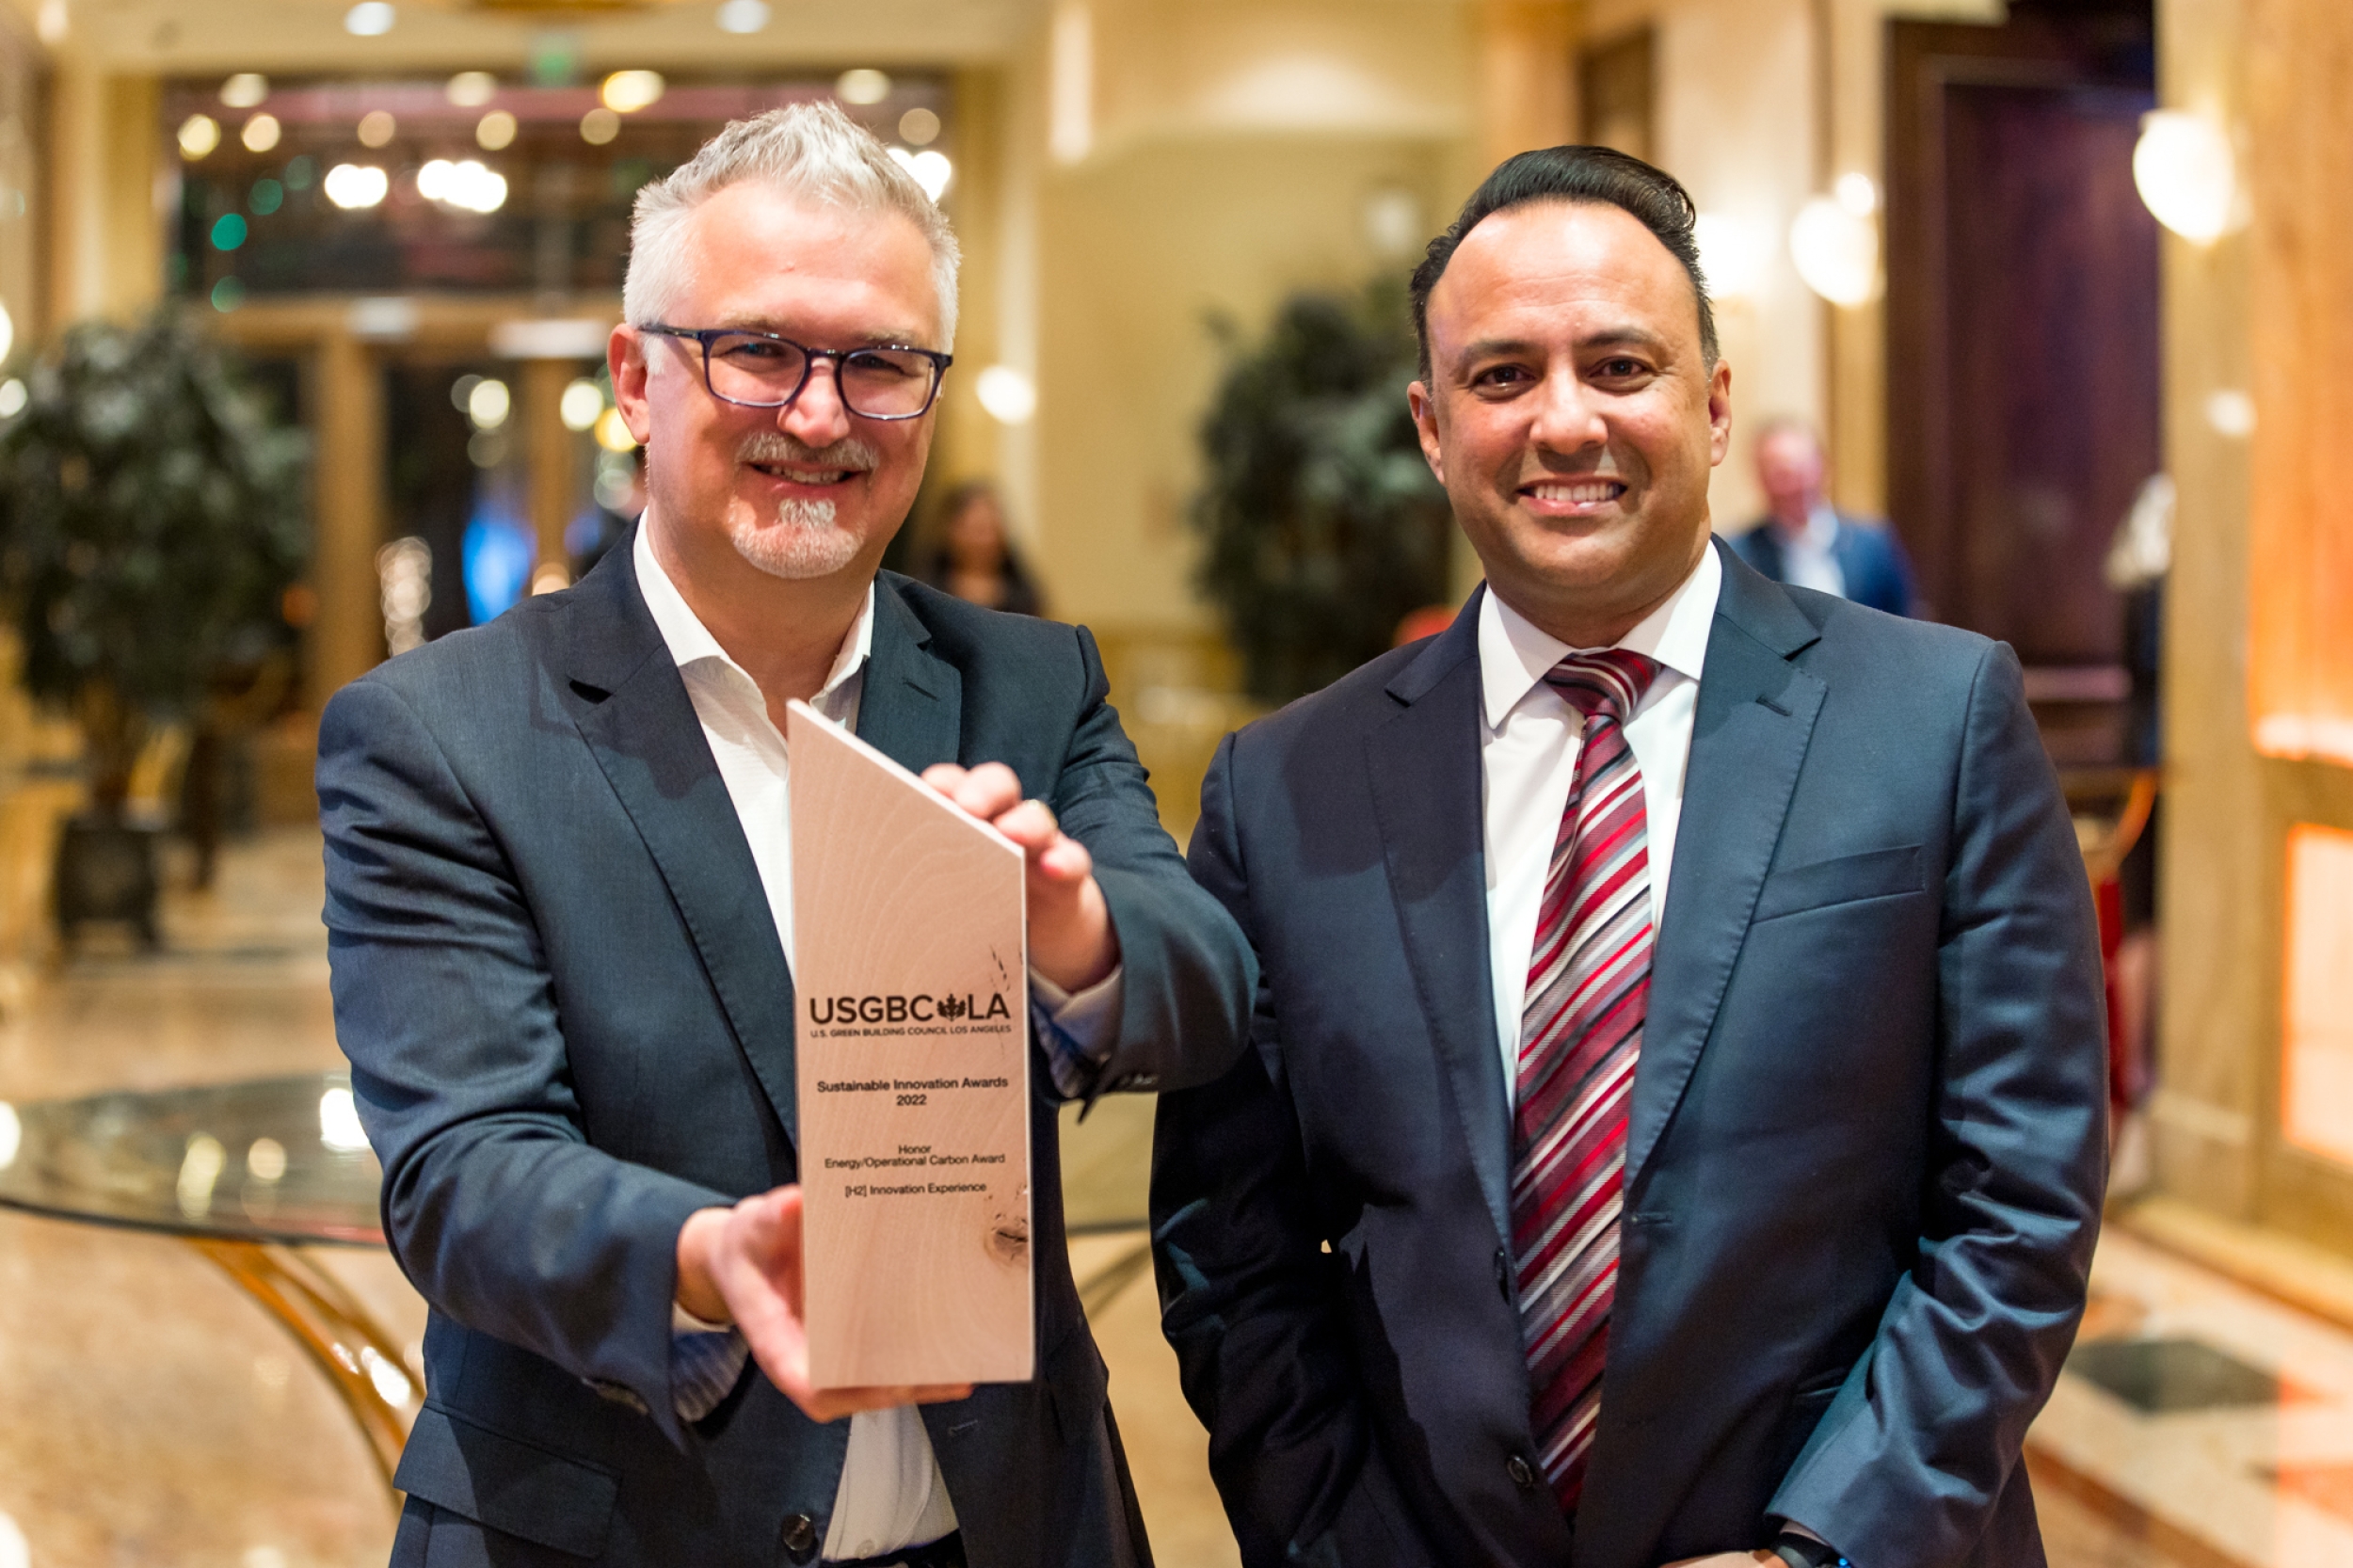 Neil Navin, vice president, clean energy innovations, and Jawaad Malik, vice president of strategy and sustainability, and chief environmental officer, accept the USGBC-LA sustainability award.